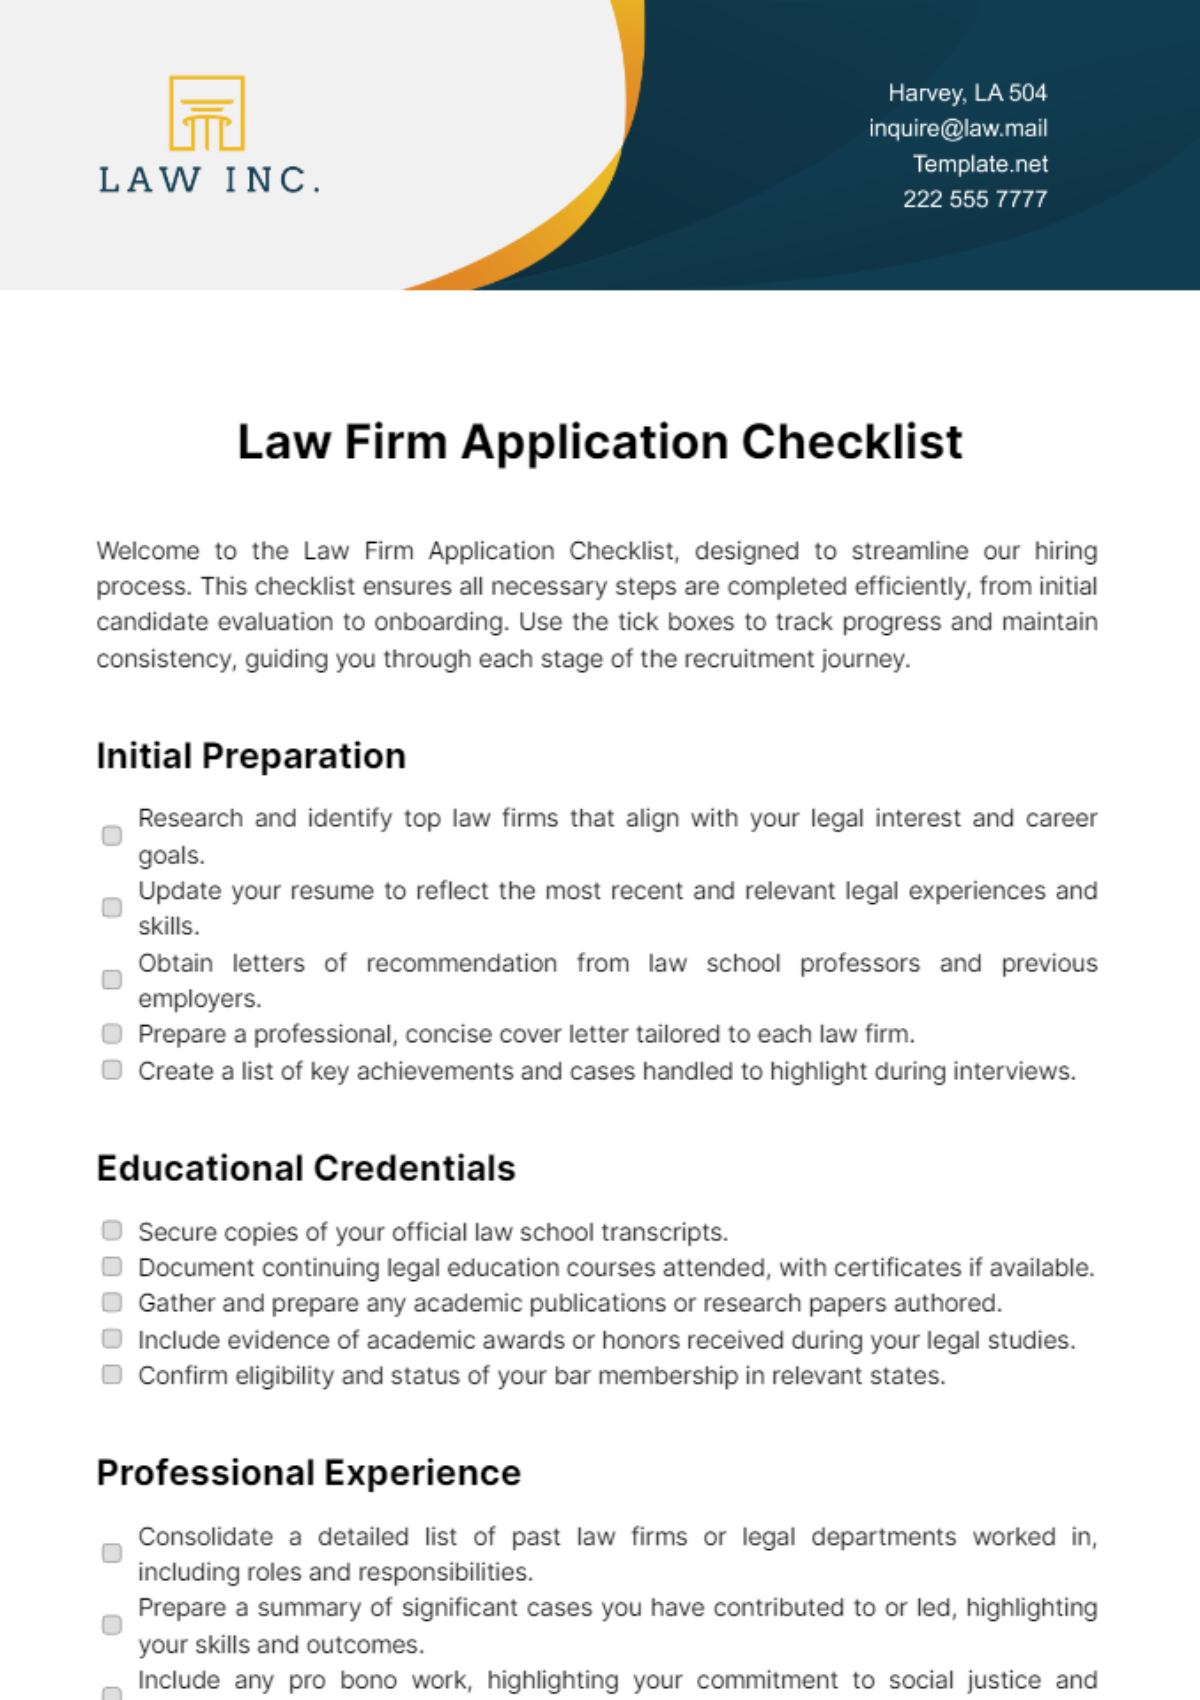 Law Firm Application Checklist Template